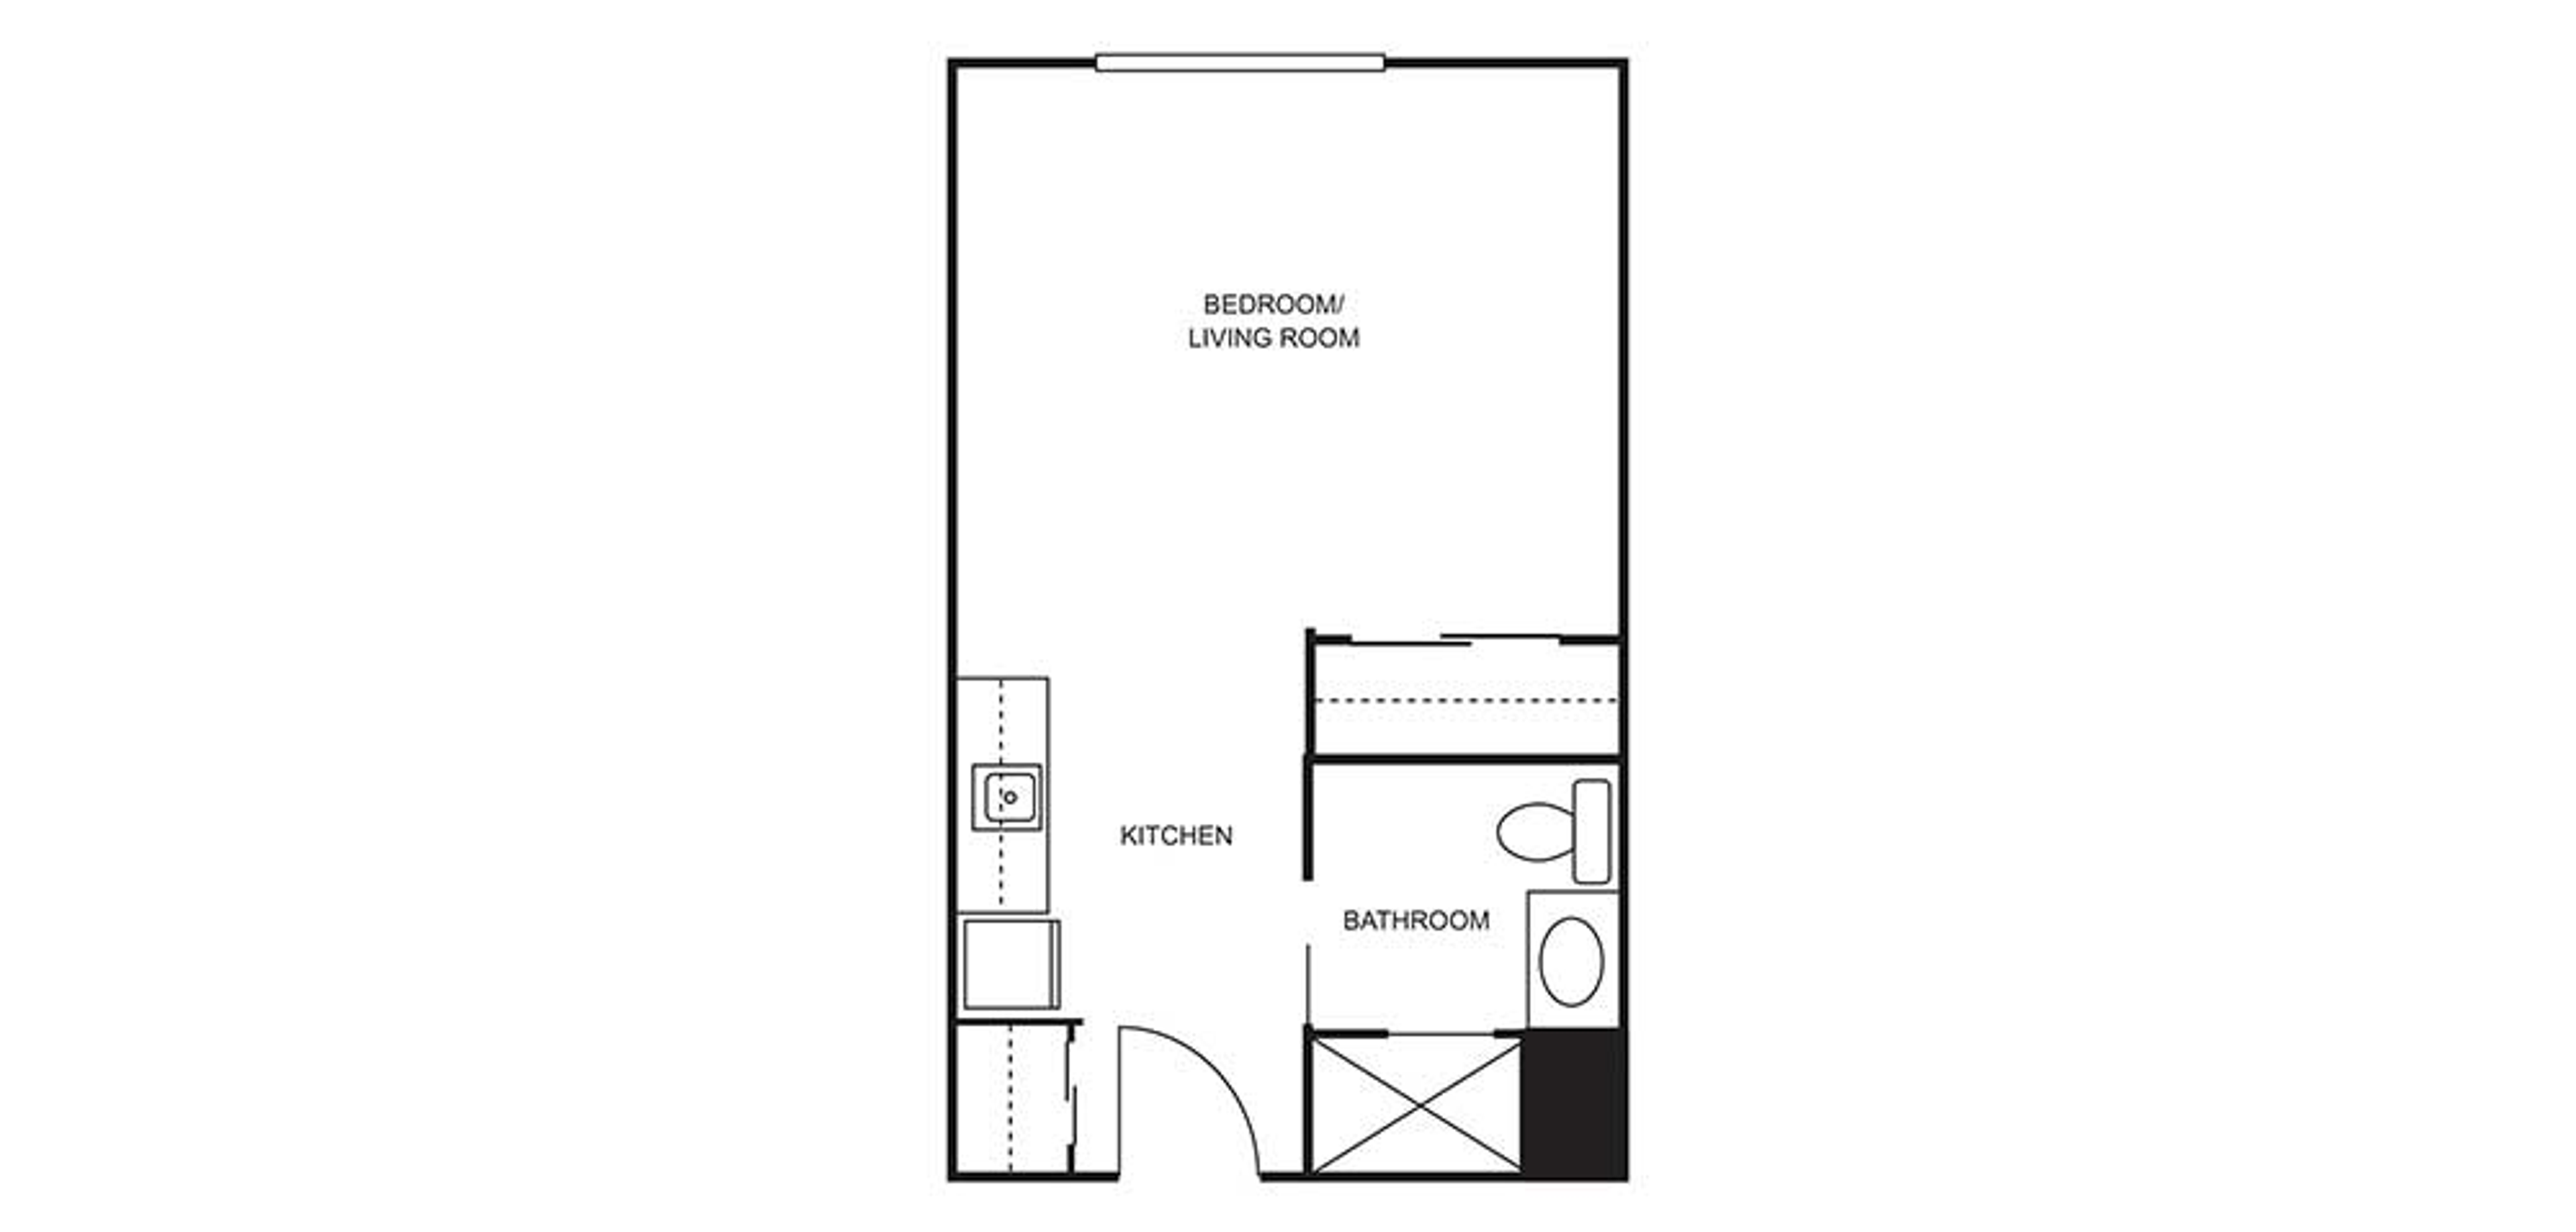 Floorplan - The Auberge at Missoula Valley - 1 bed, 1 bath, Studio Assisted Living